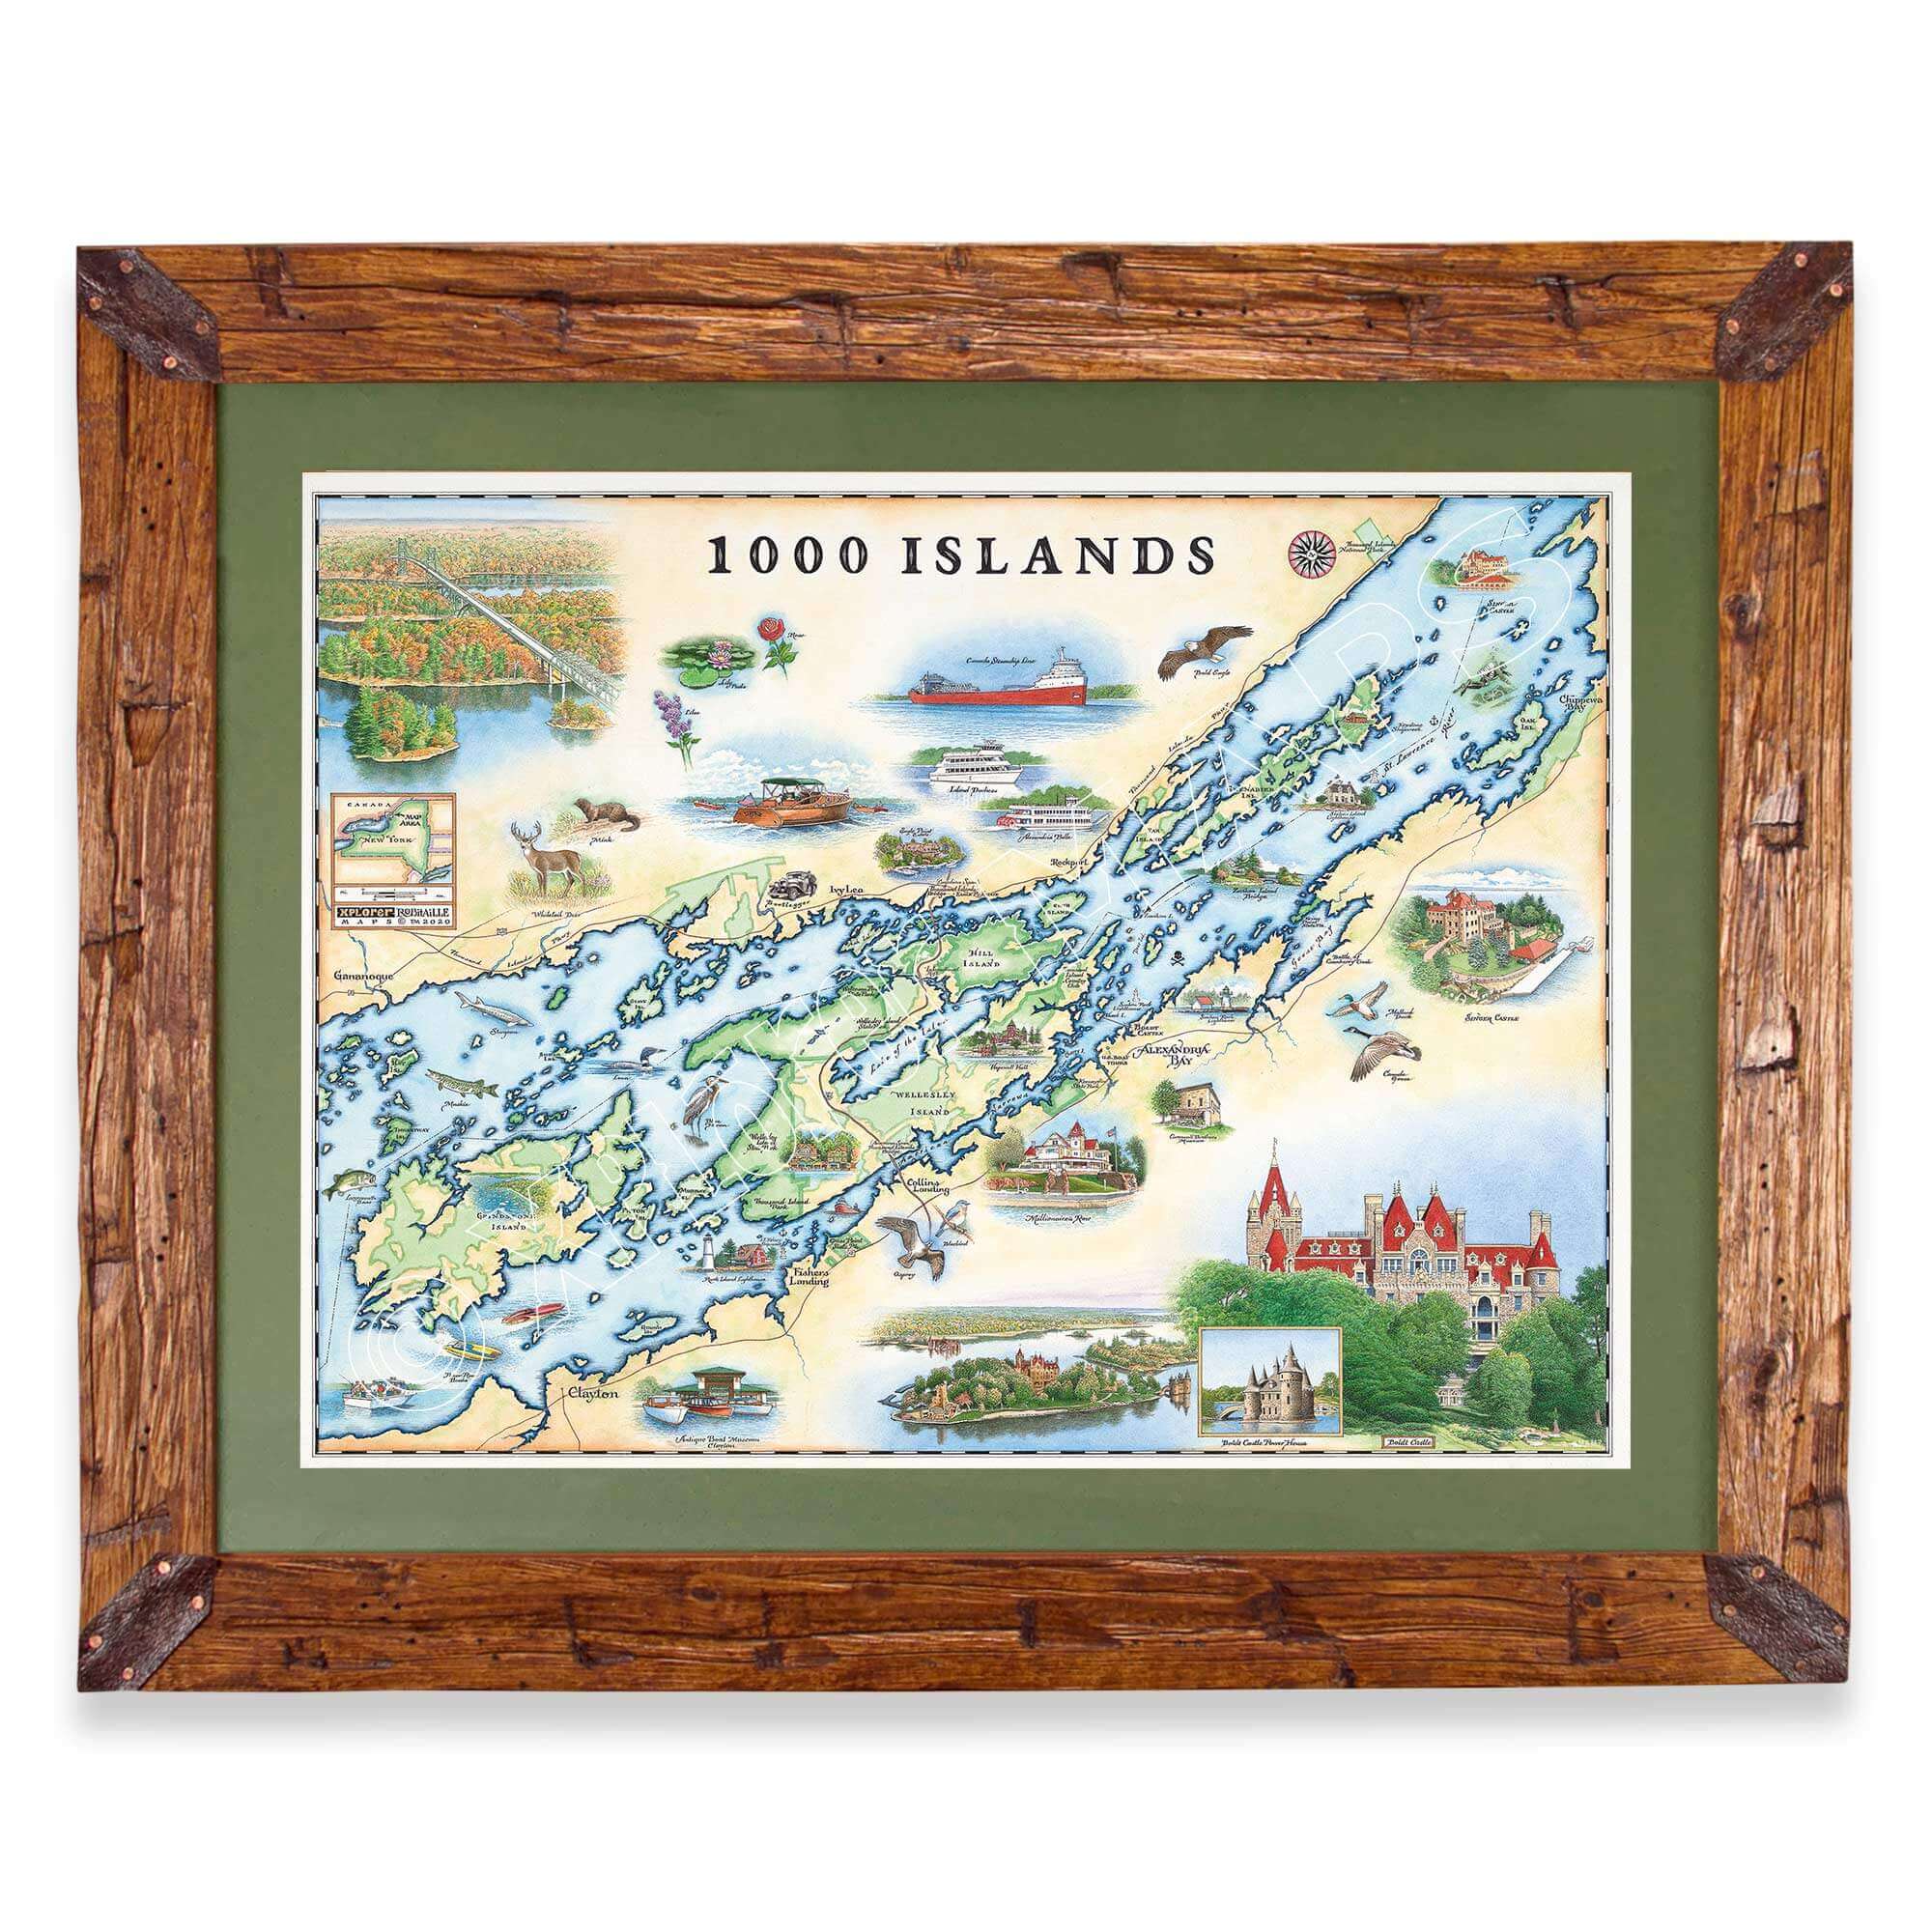 1000 Islands hand-drawn map in a Montana hand-scraped pine wood frame with green mat.